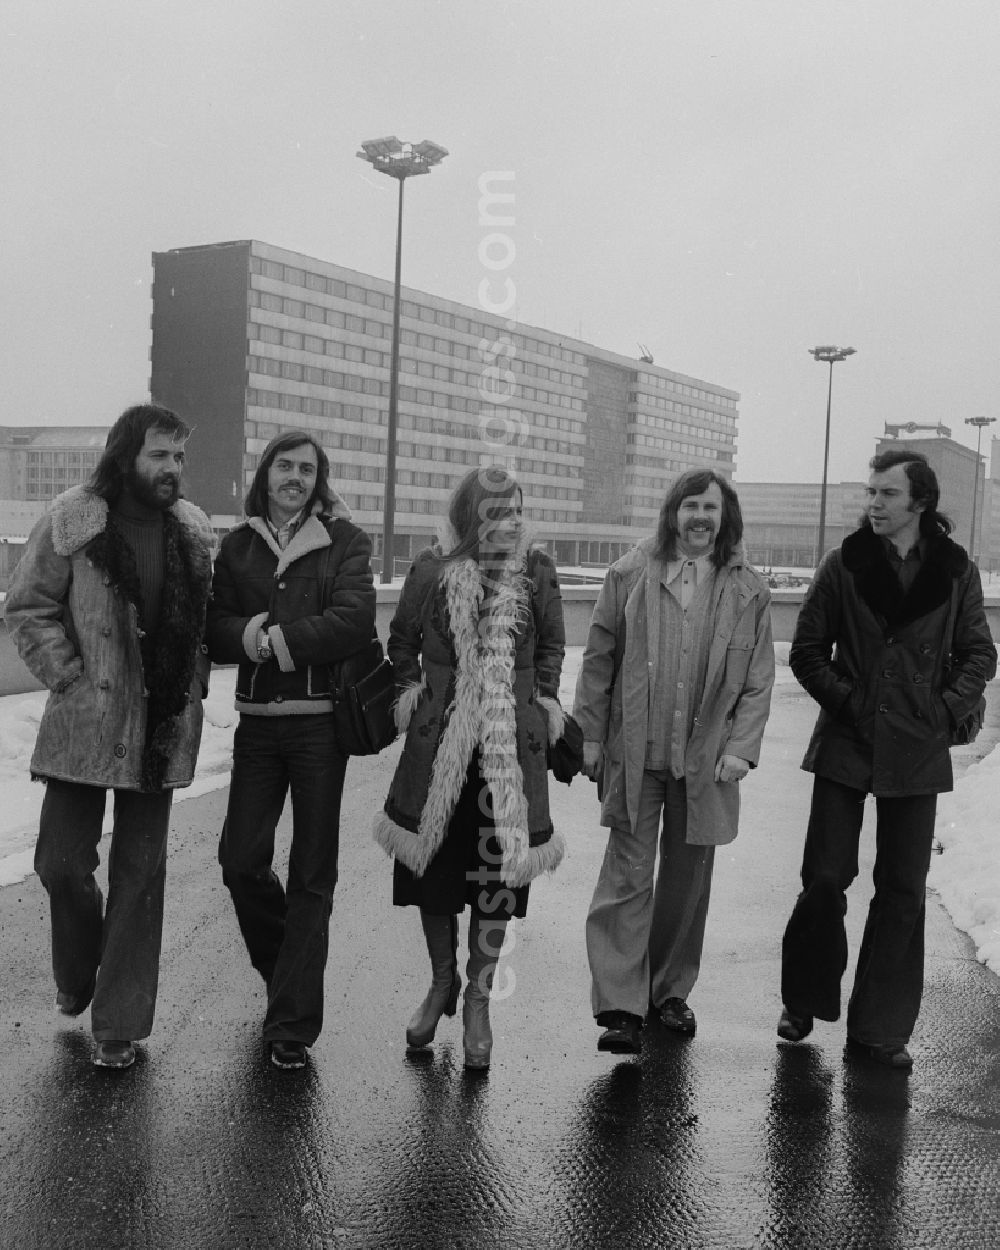 GDR image archive: Chemnitz - The music group WE in Karl-Marx-Stadt today Chemnitz in Saxony today